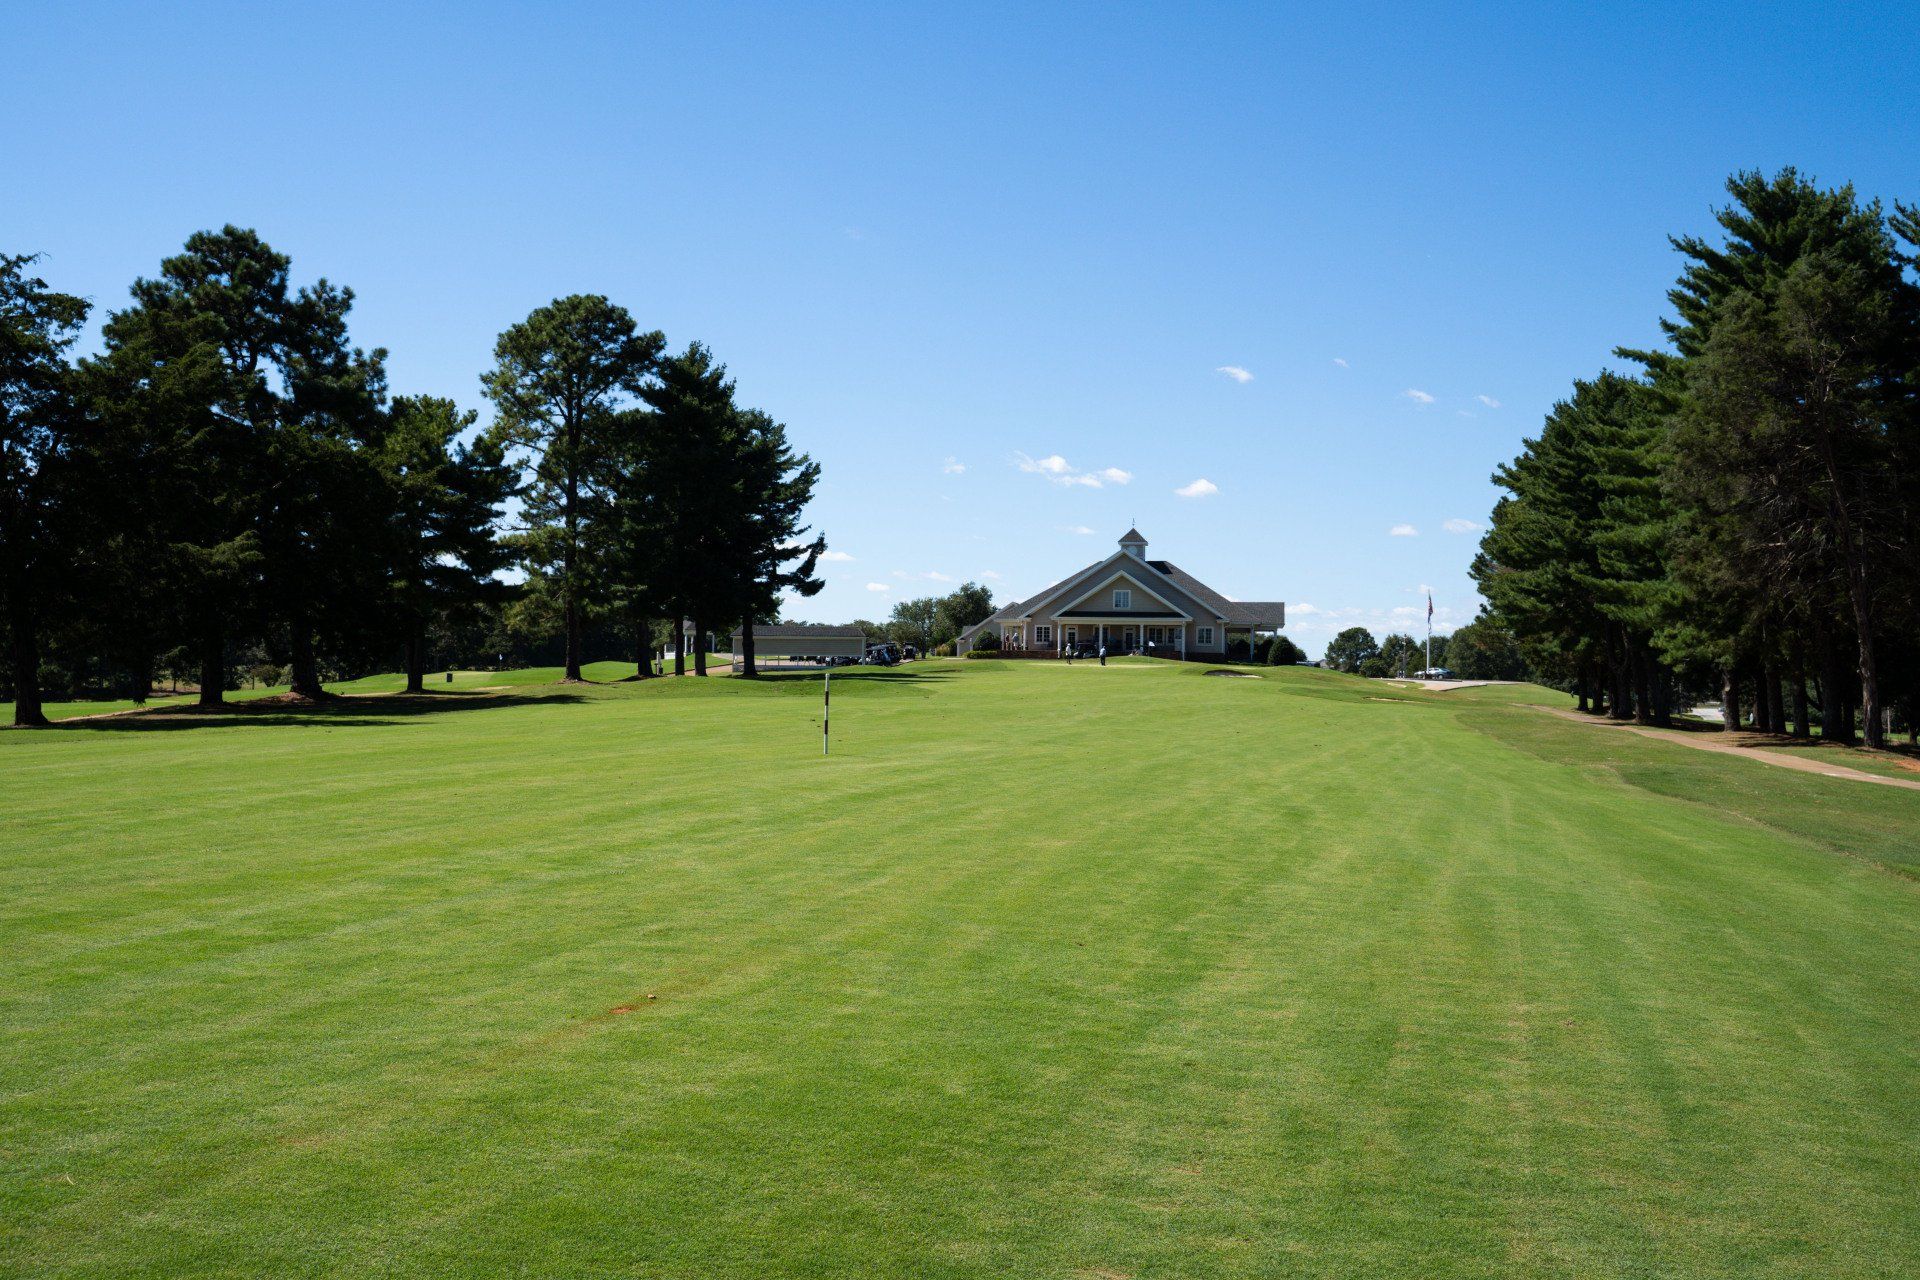 Greer Golf Course: A Hole-by-Hole Guide to a Championship Layout